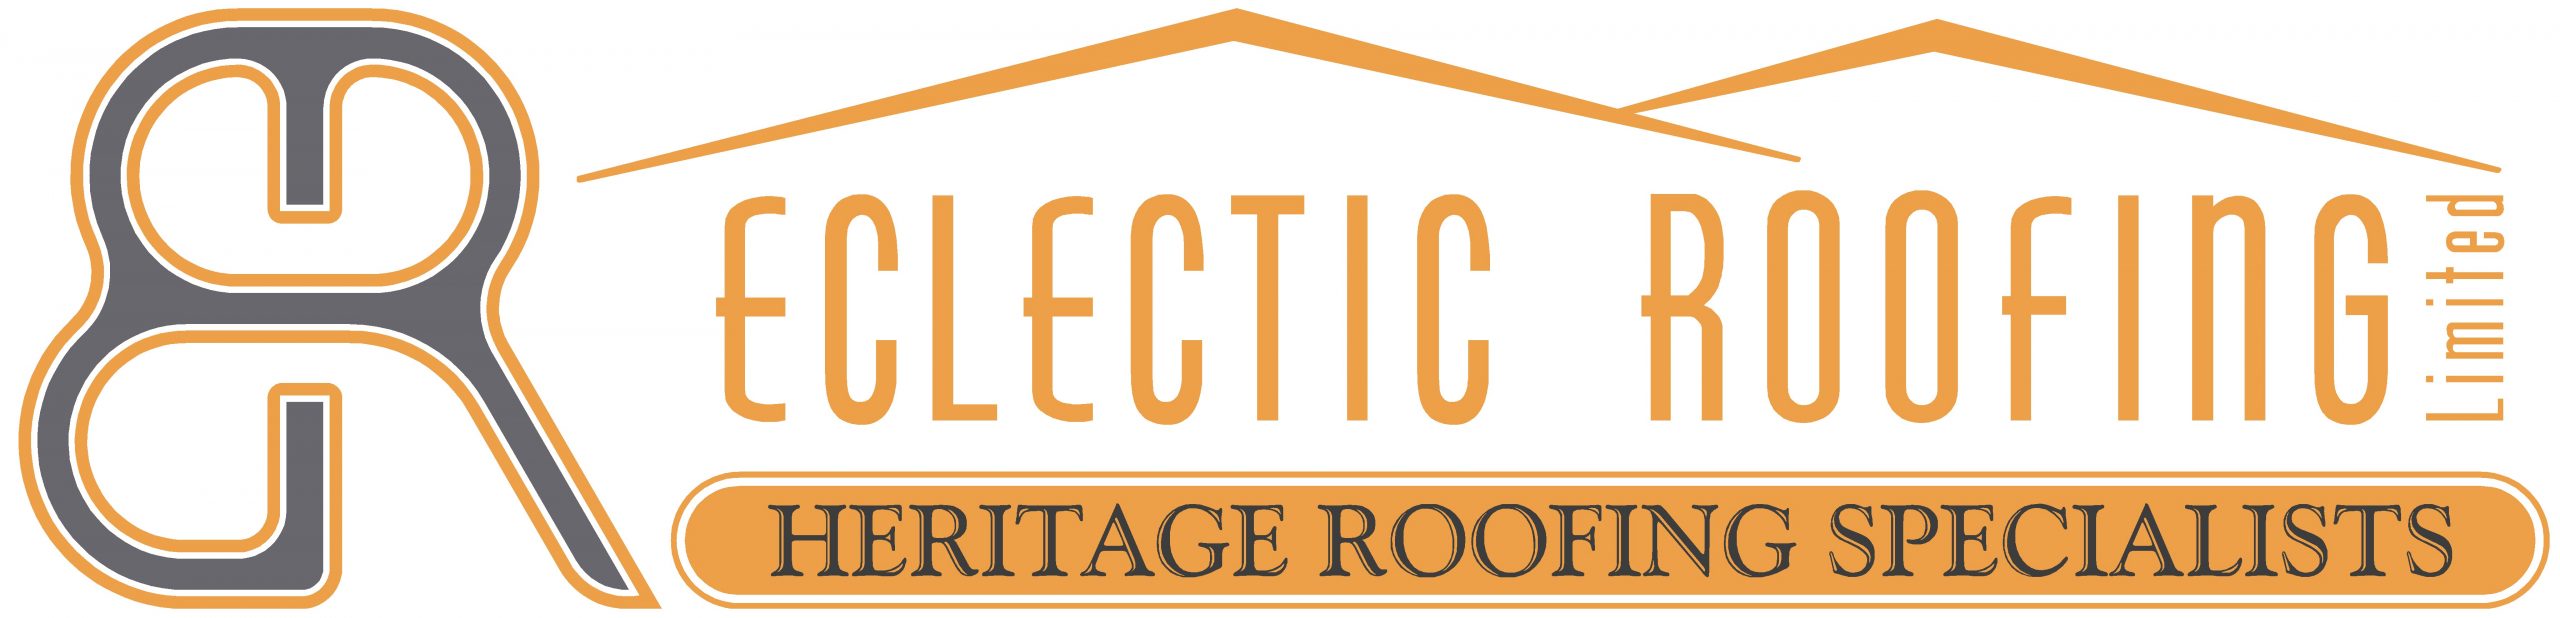 Eclectic Roofing Logo